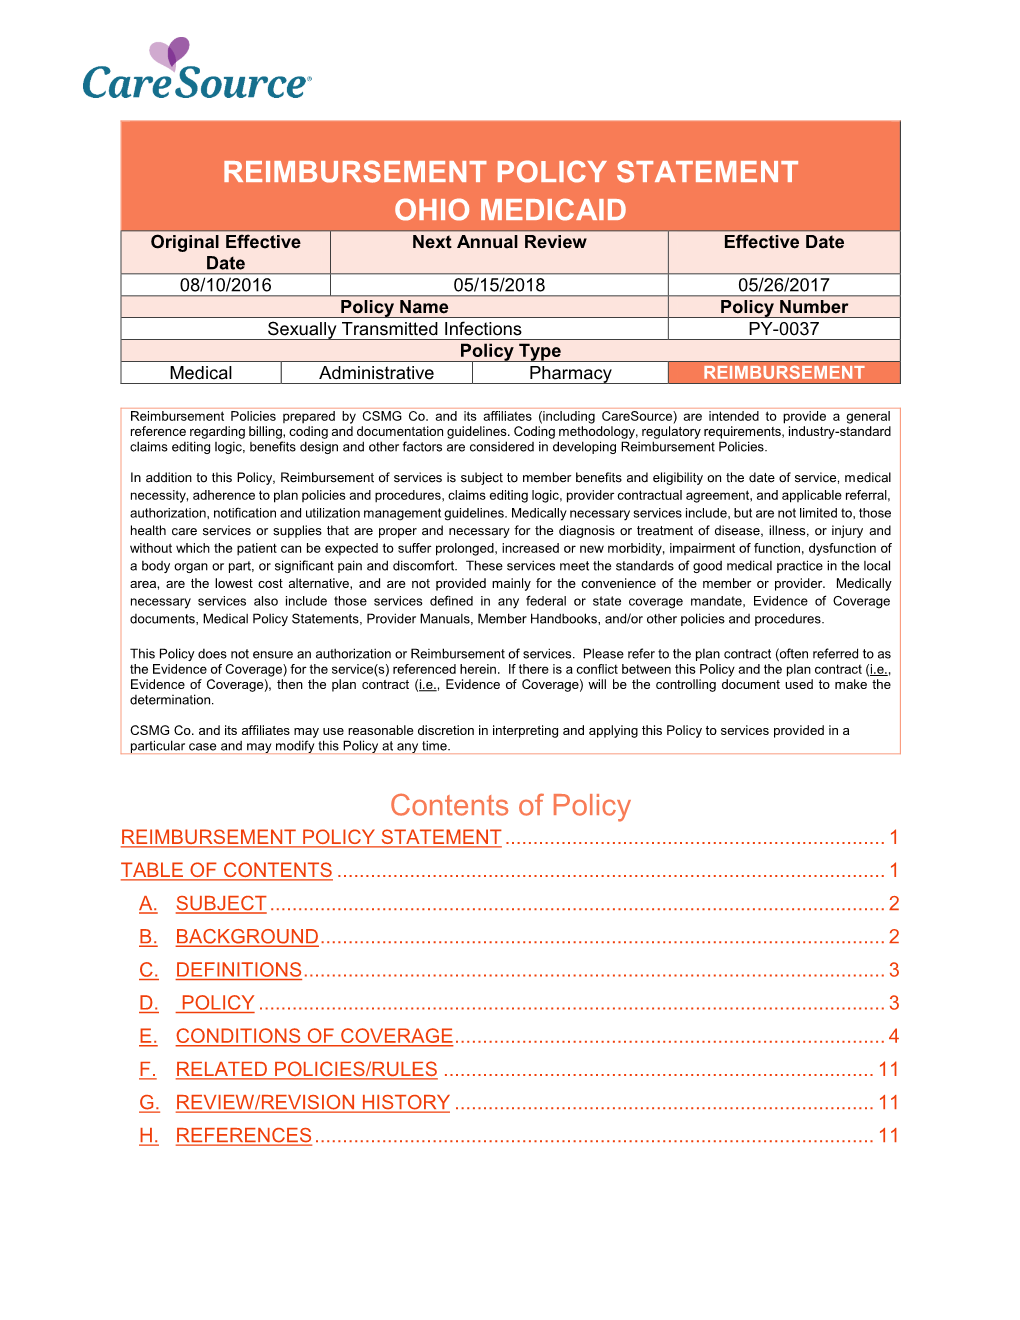 PY-0037 Sexually Transmitted Infections Reimbursement Policy